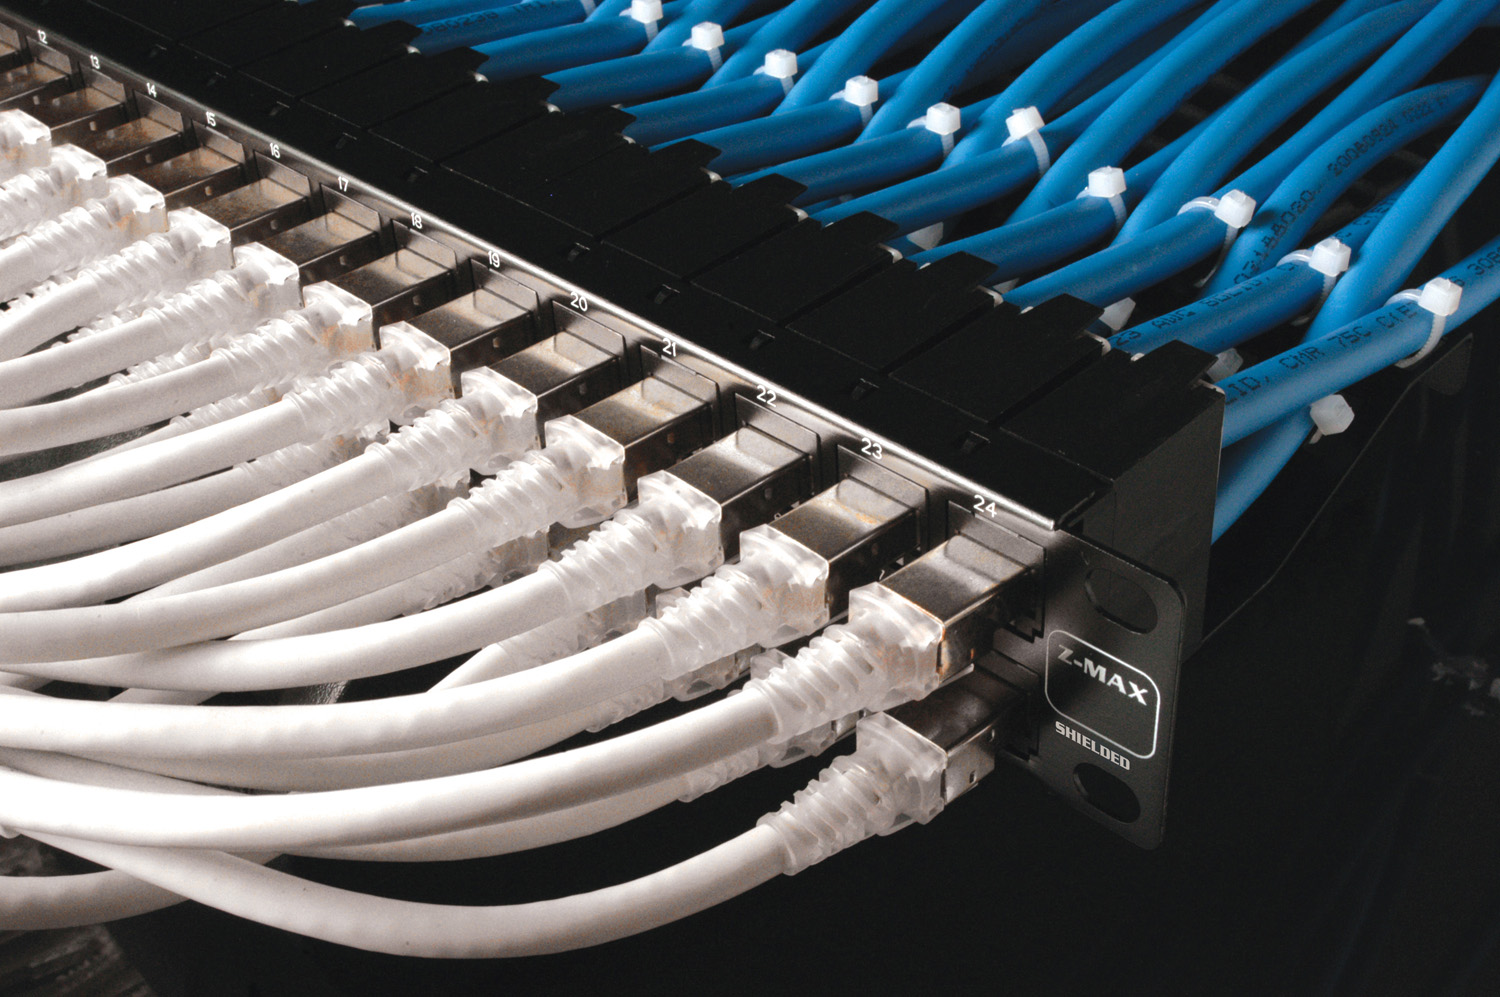 Westwego Louisiana Trusted Voice & Data Network Cabling Services